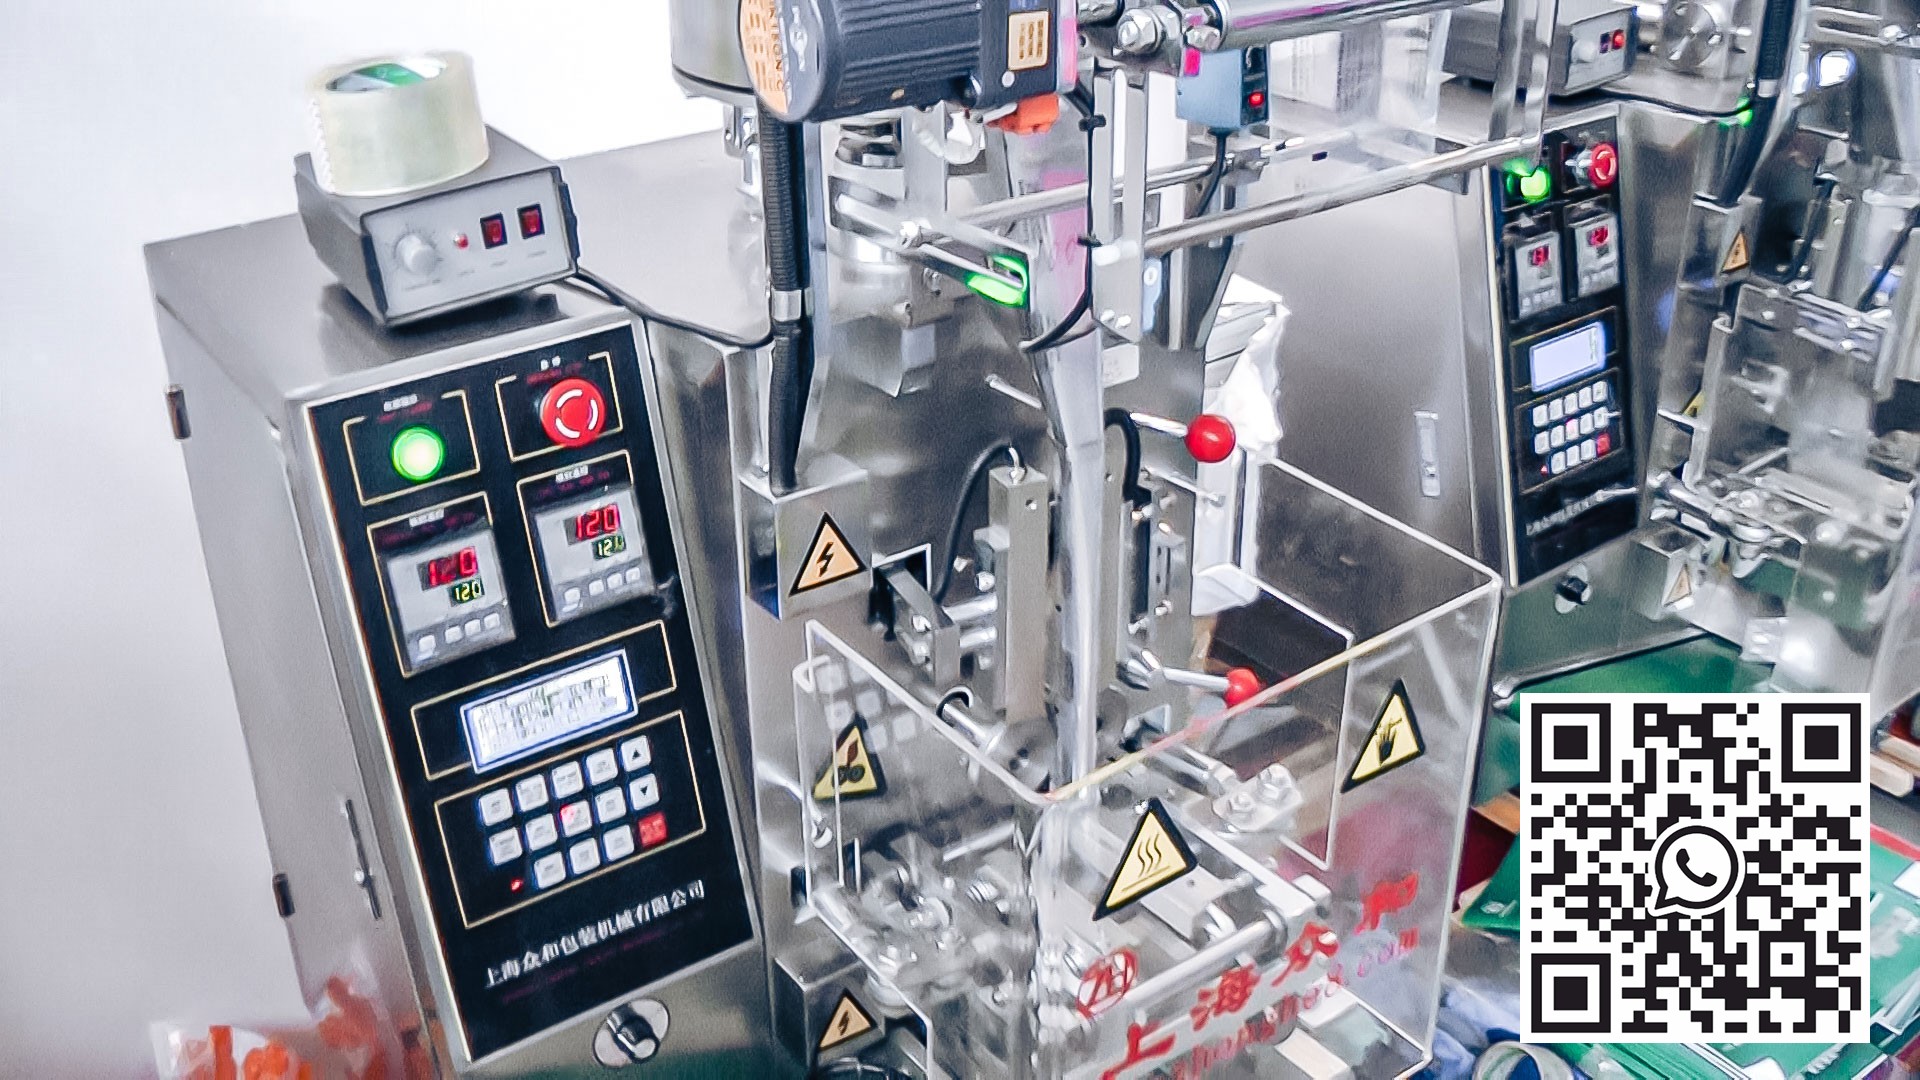 Automatic equipment for packing in bulk products into bags in pharmaceutical production